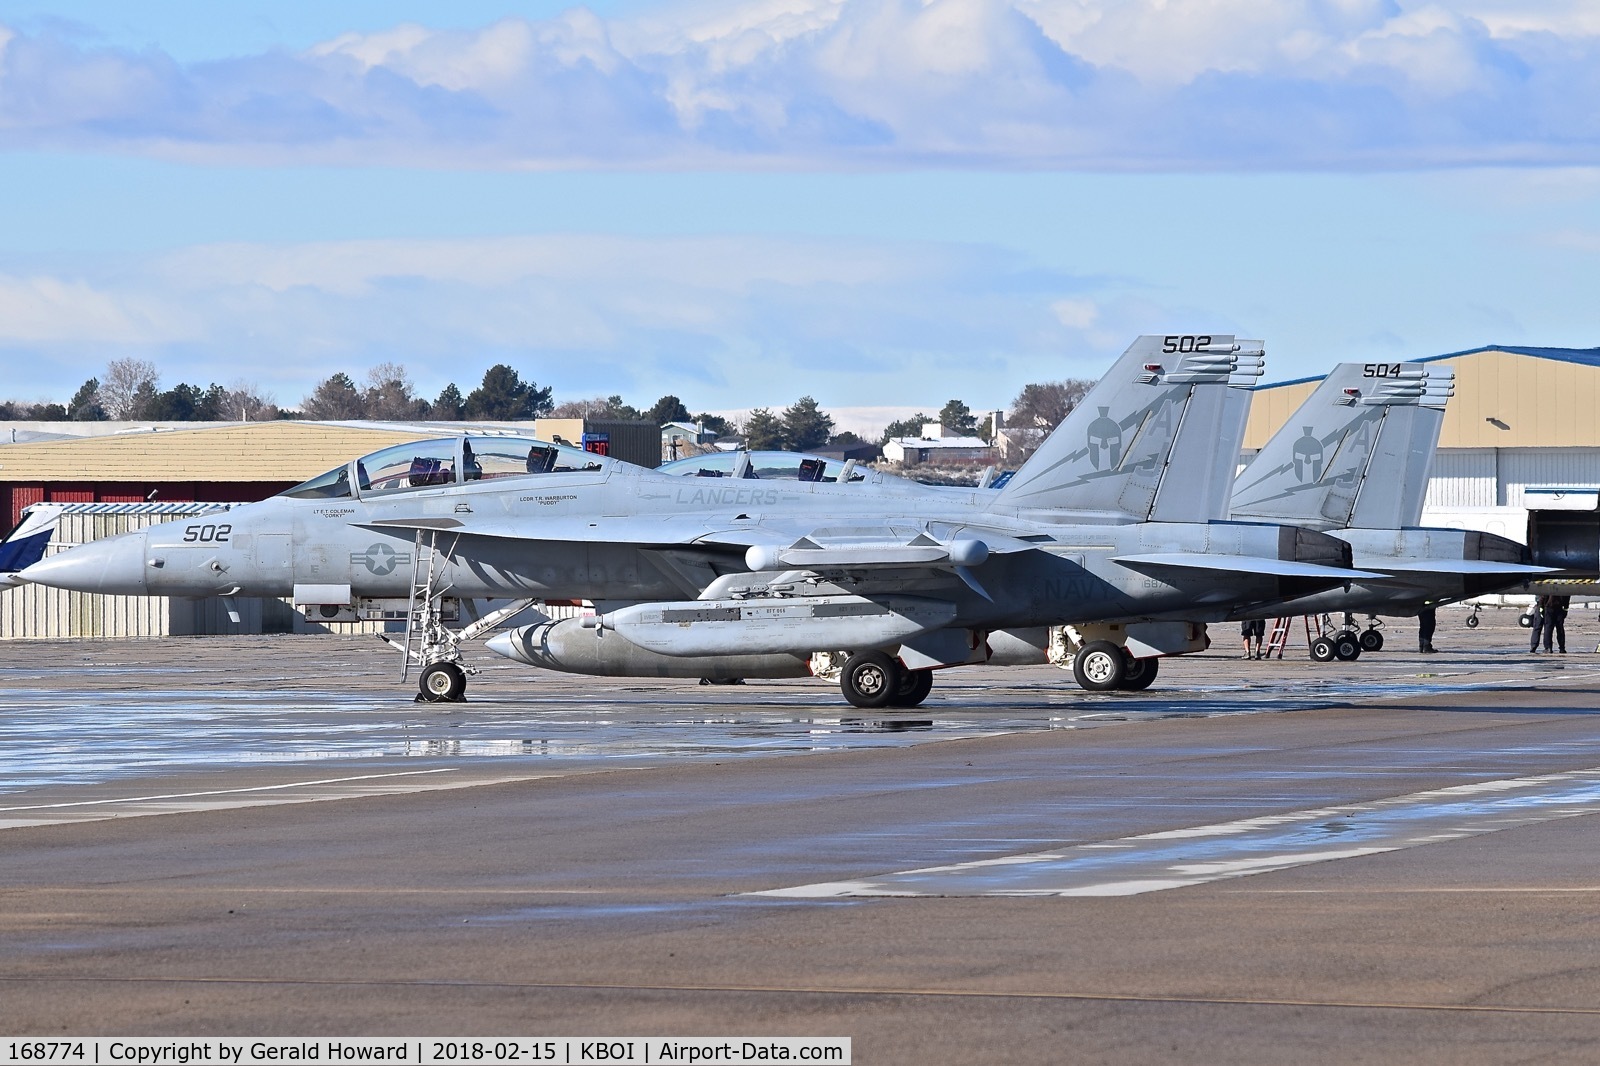 168774, Boeing EA-18G Growler C/N G-88, Two EA-18Gs from VAQ-131 “Lancers”, CVN-77, USS George H.W. Bush parked on the south GA ramp for a fuel stop.